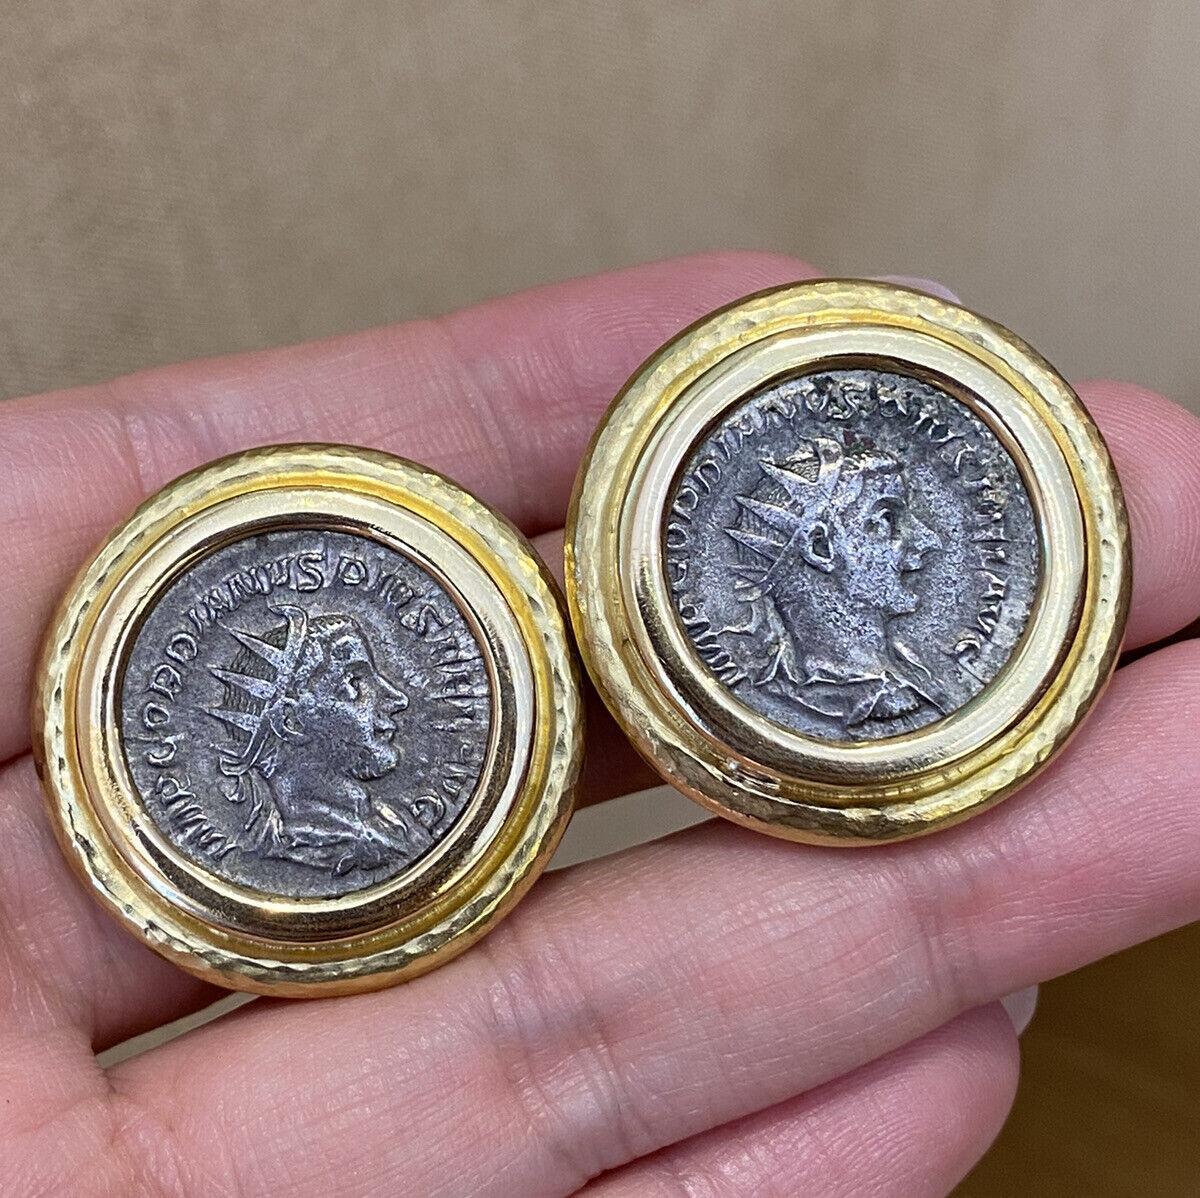 Large ELIZABETH LOCKE Coin Button Earrings in 18k Yellow Gold

Large Coin Button Earrings by Elizabeth Locke feature a pair of large Coins, inspired by the Ancient Greek and Romans, bezel-set hammered in 18k Yellow Gold.  The earrings are secured by